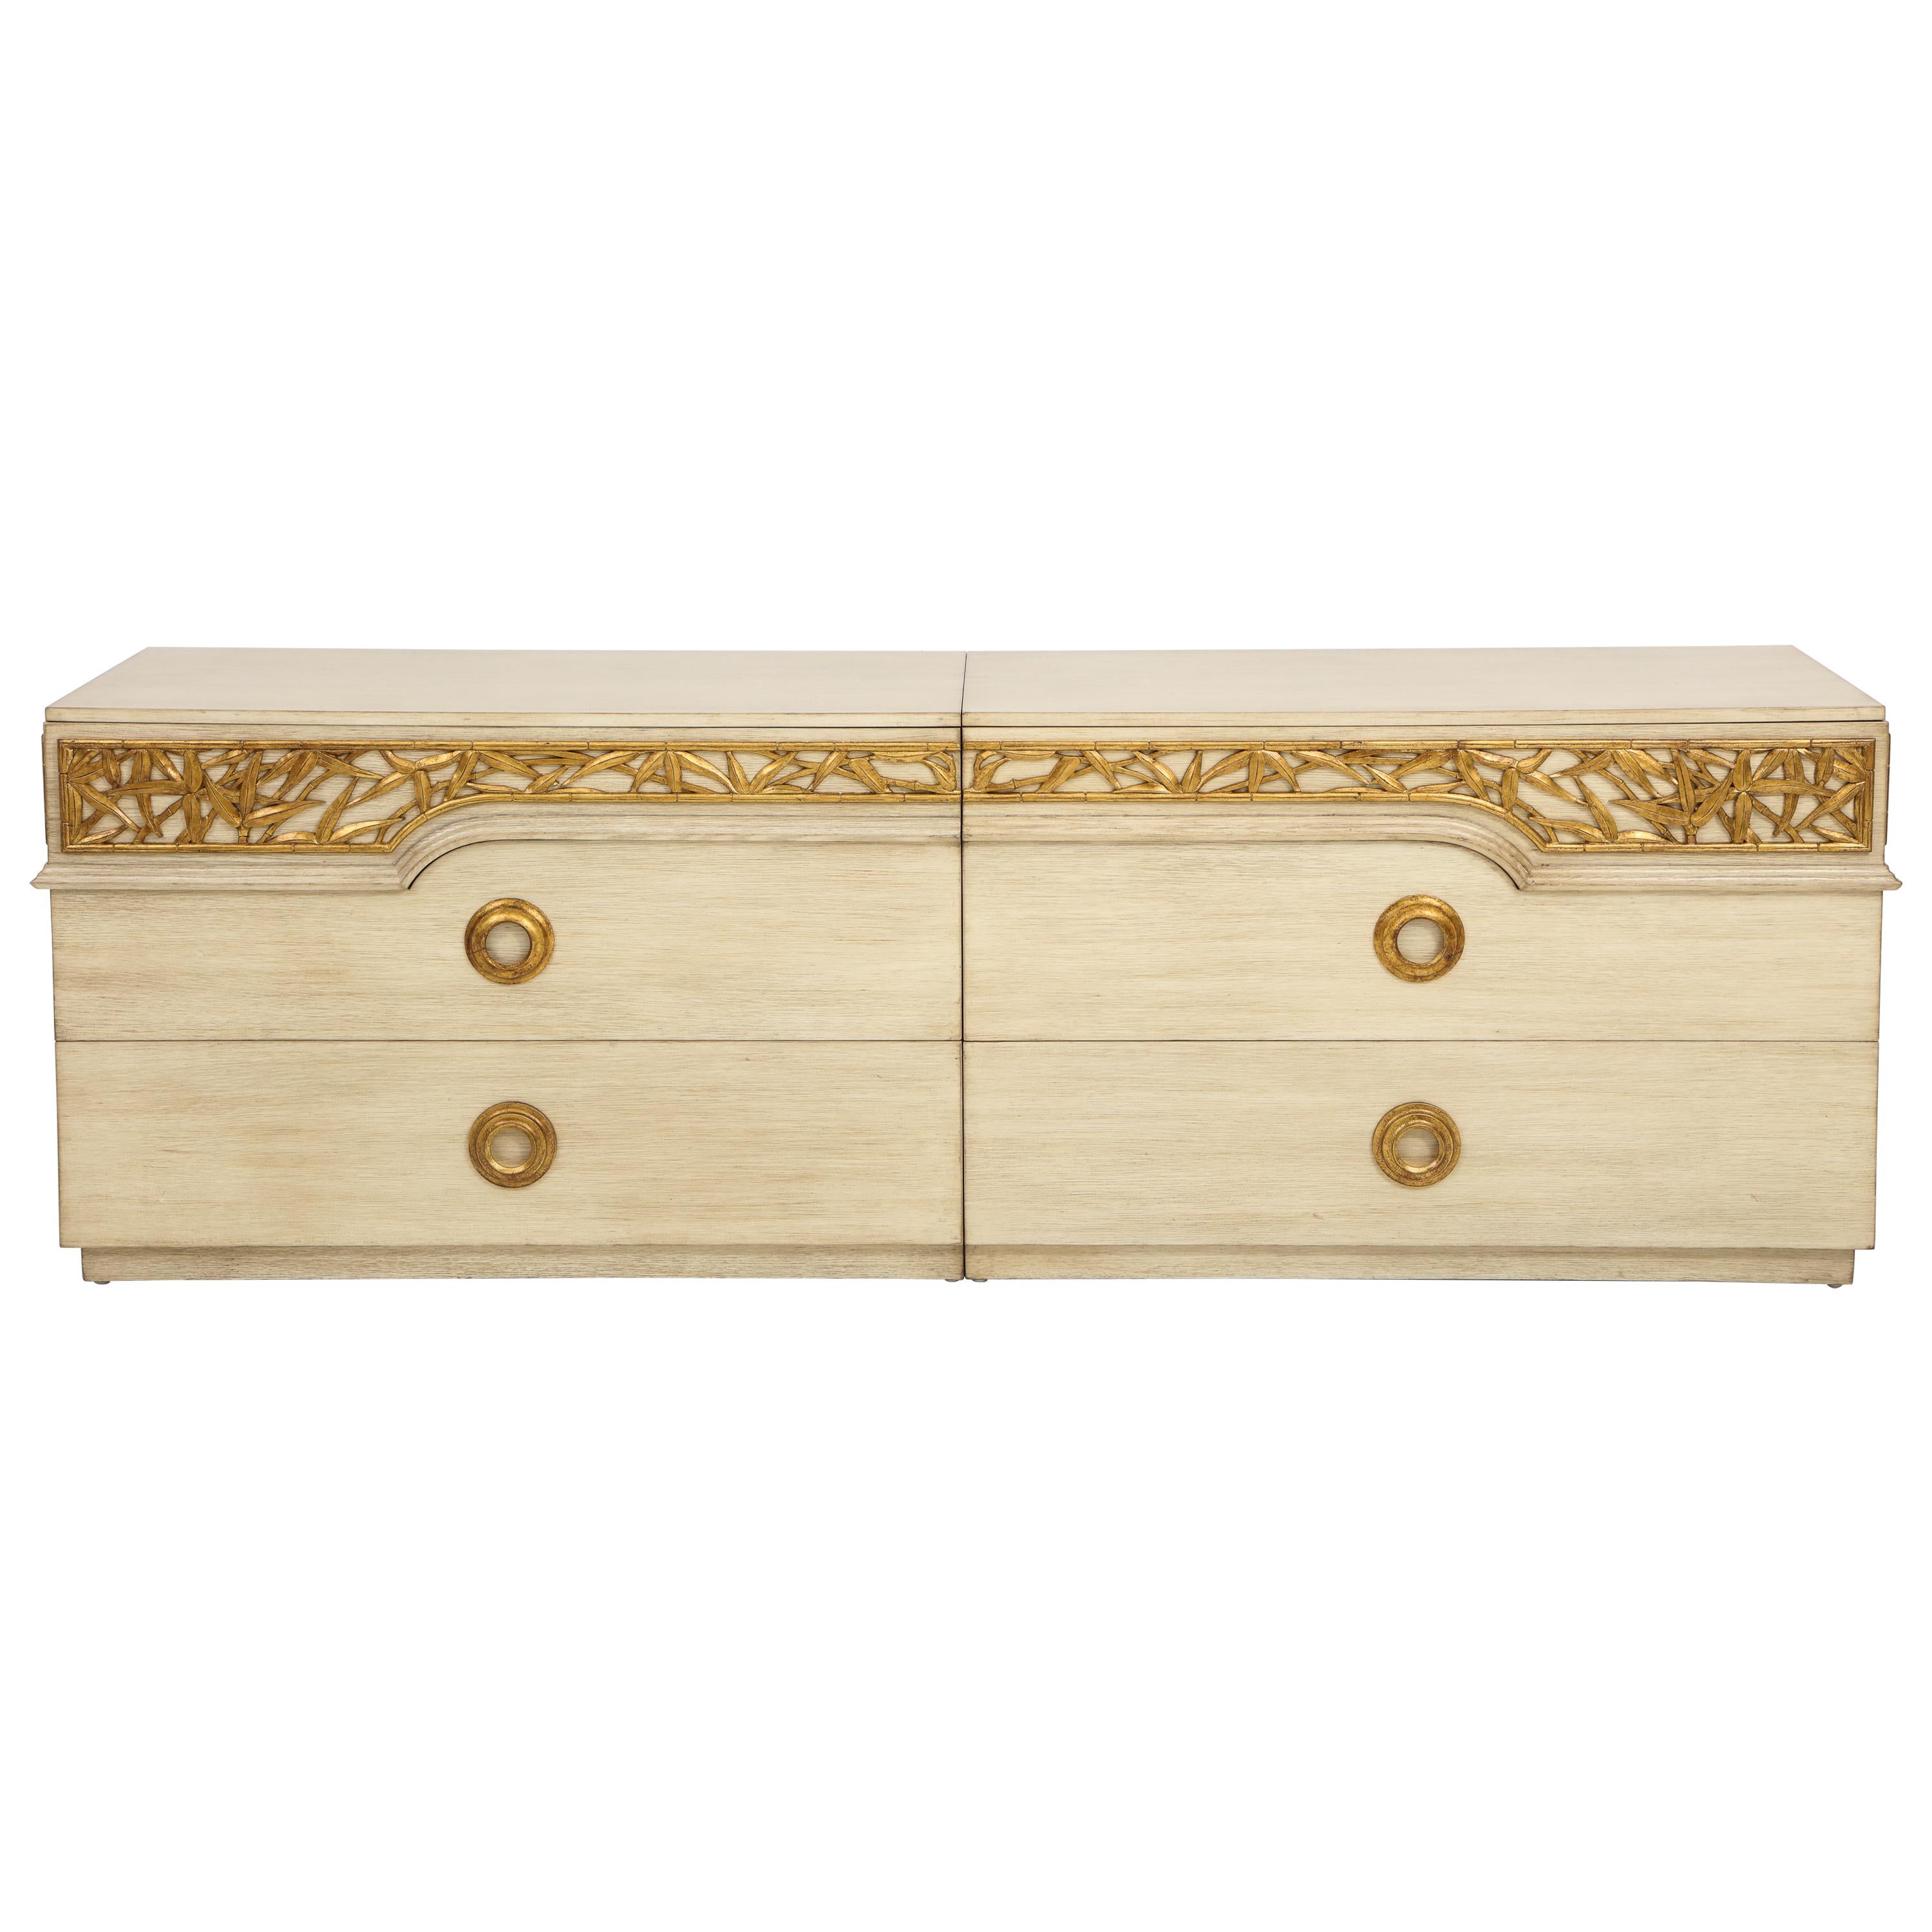 Large Bamboo Dresser by James Mont